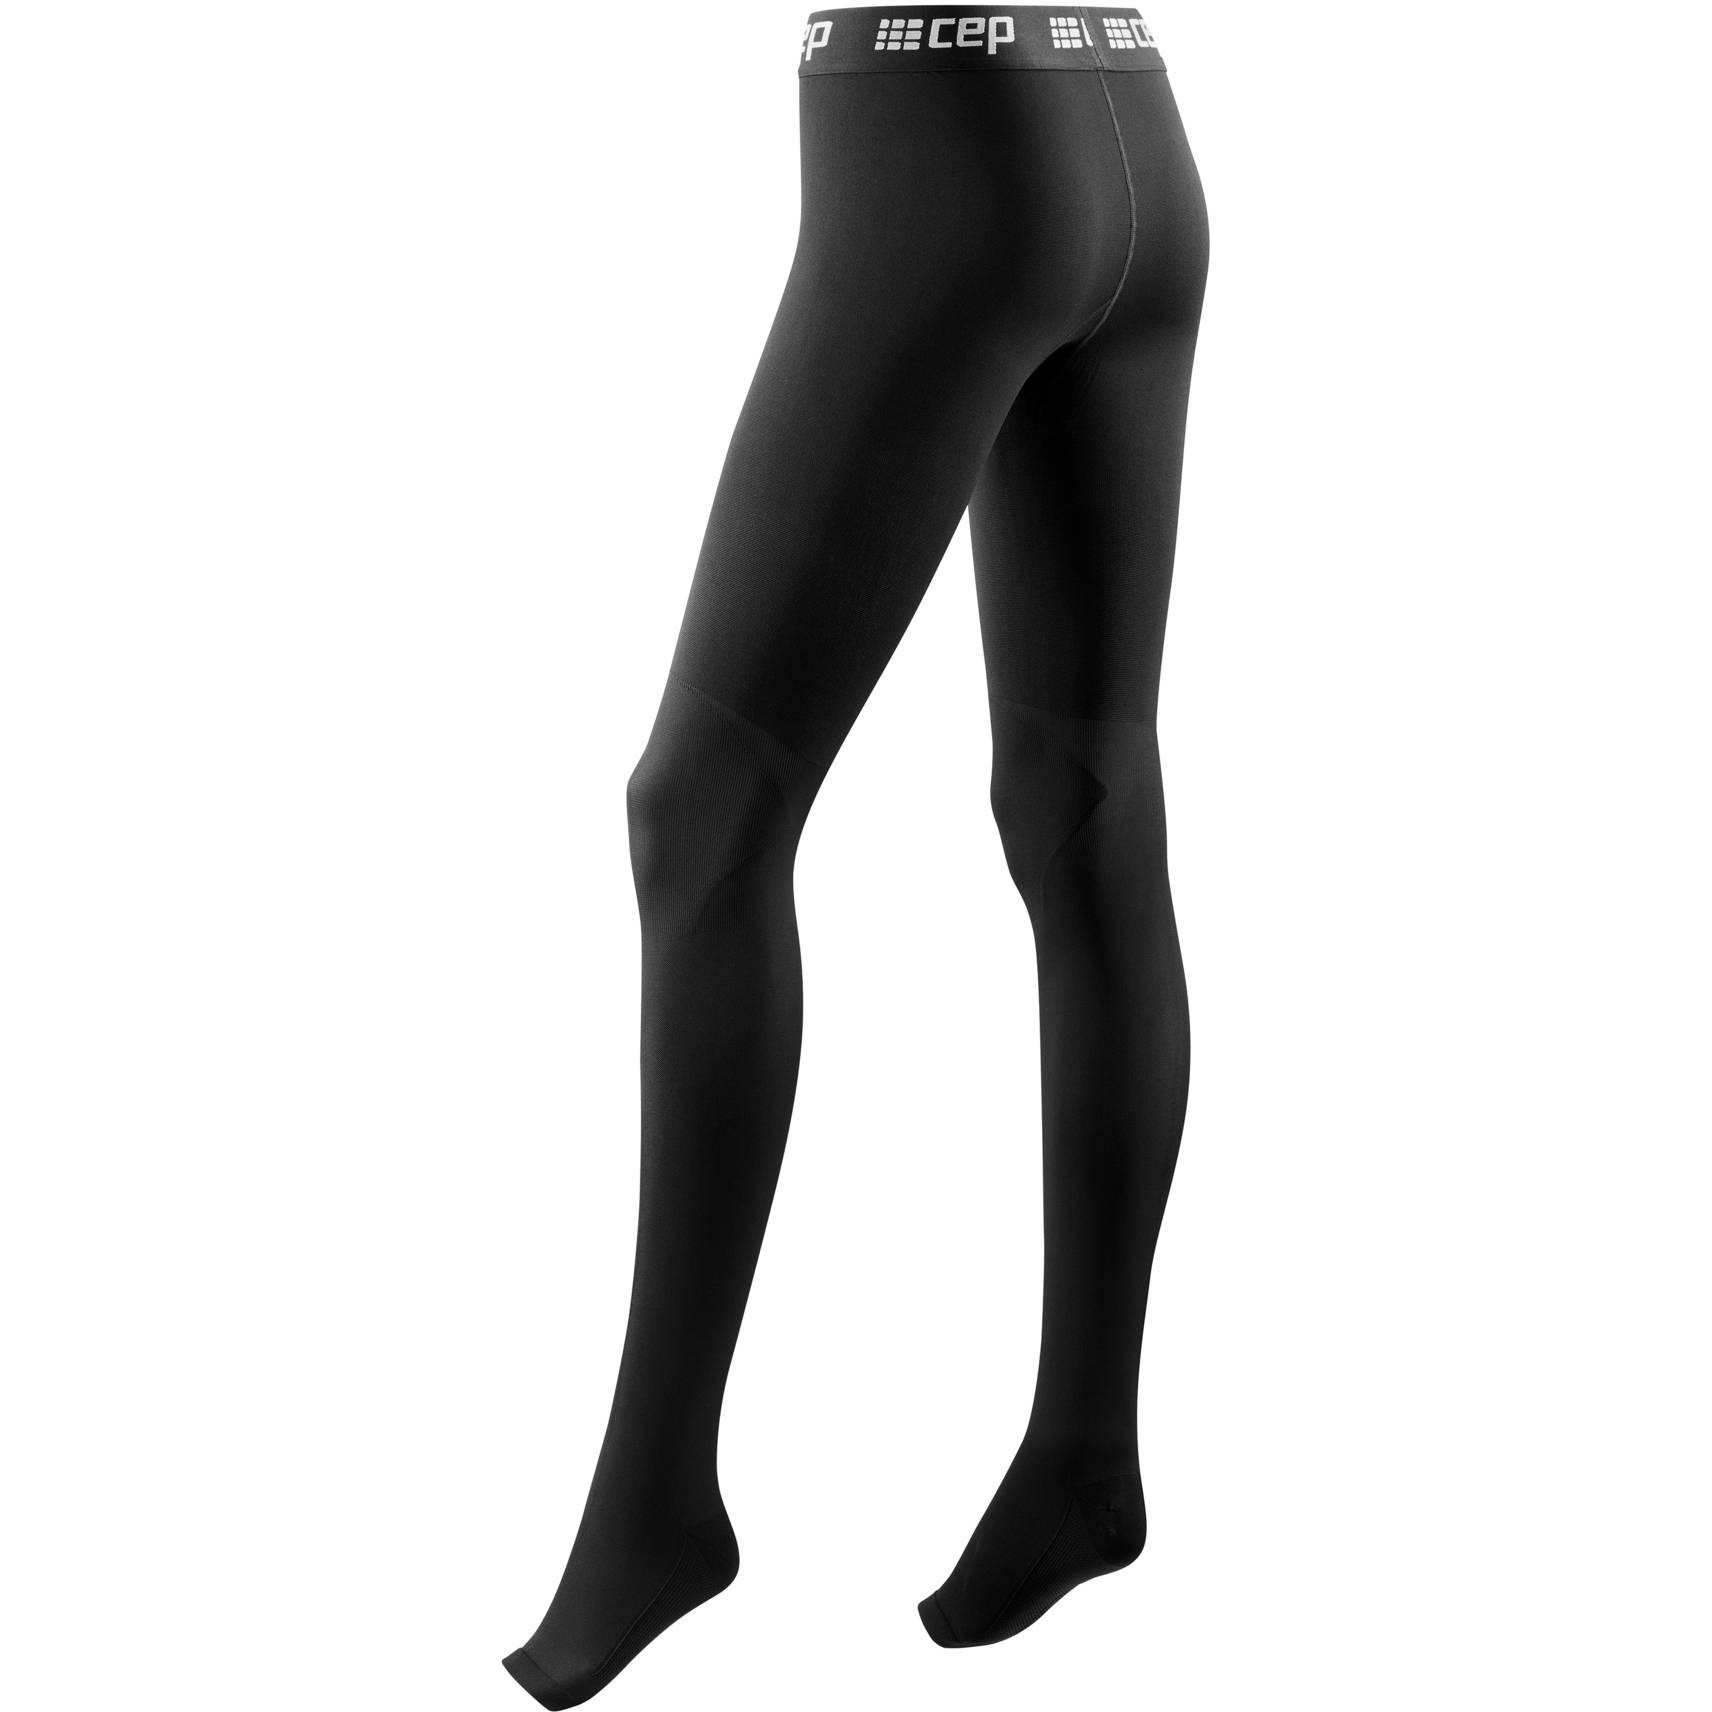 Recovery Tights vs Compression Tights